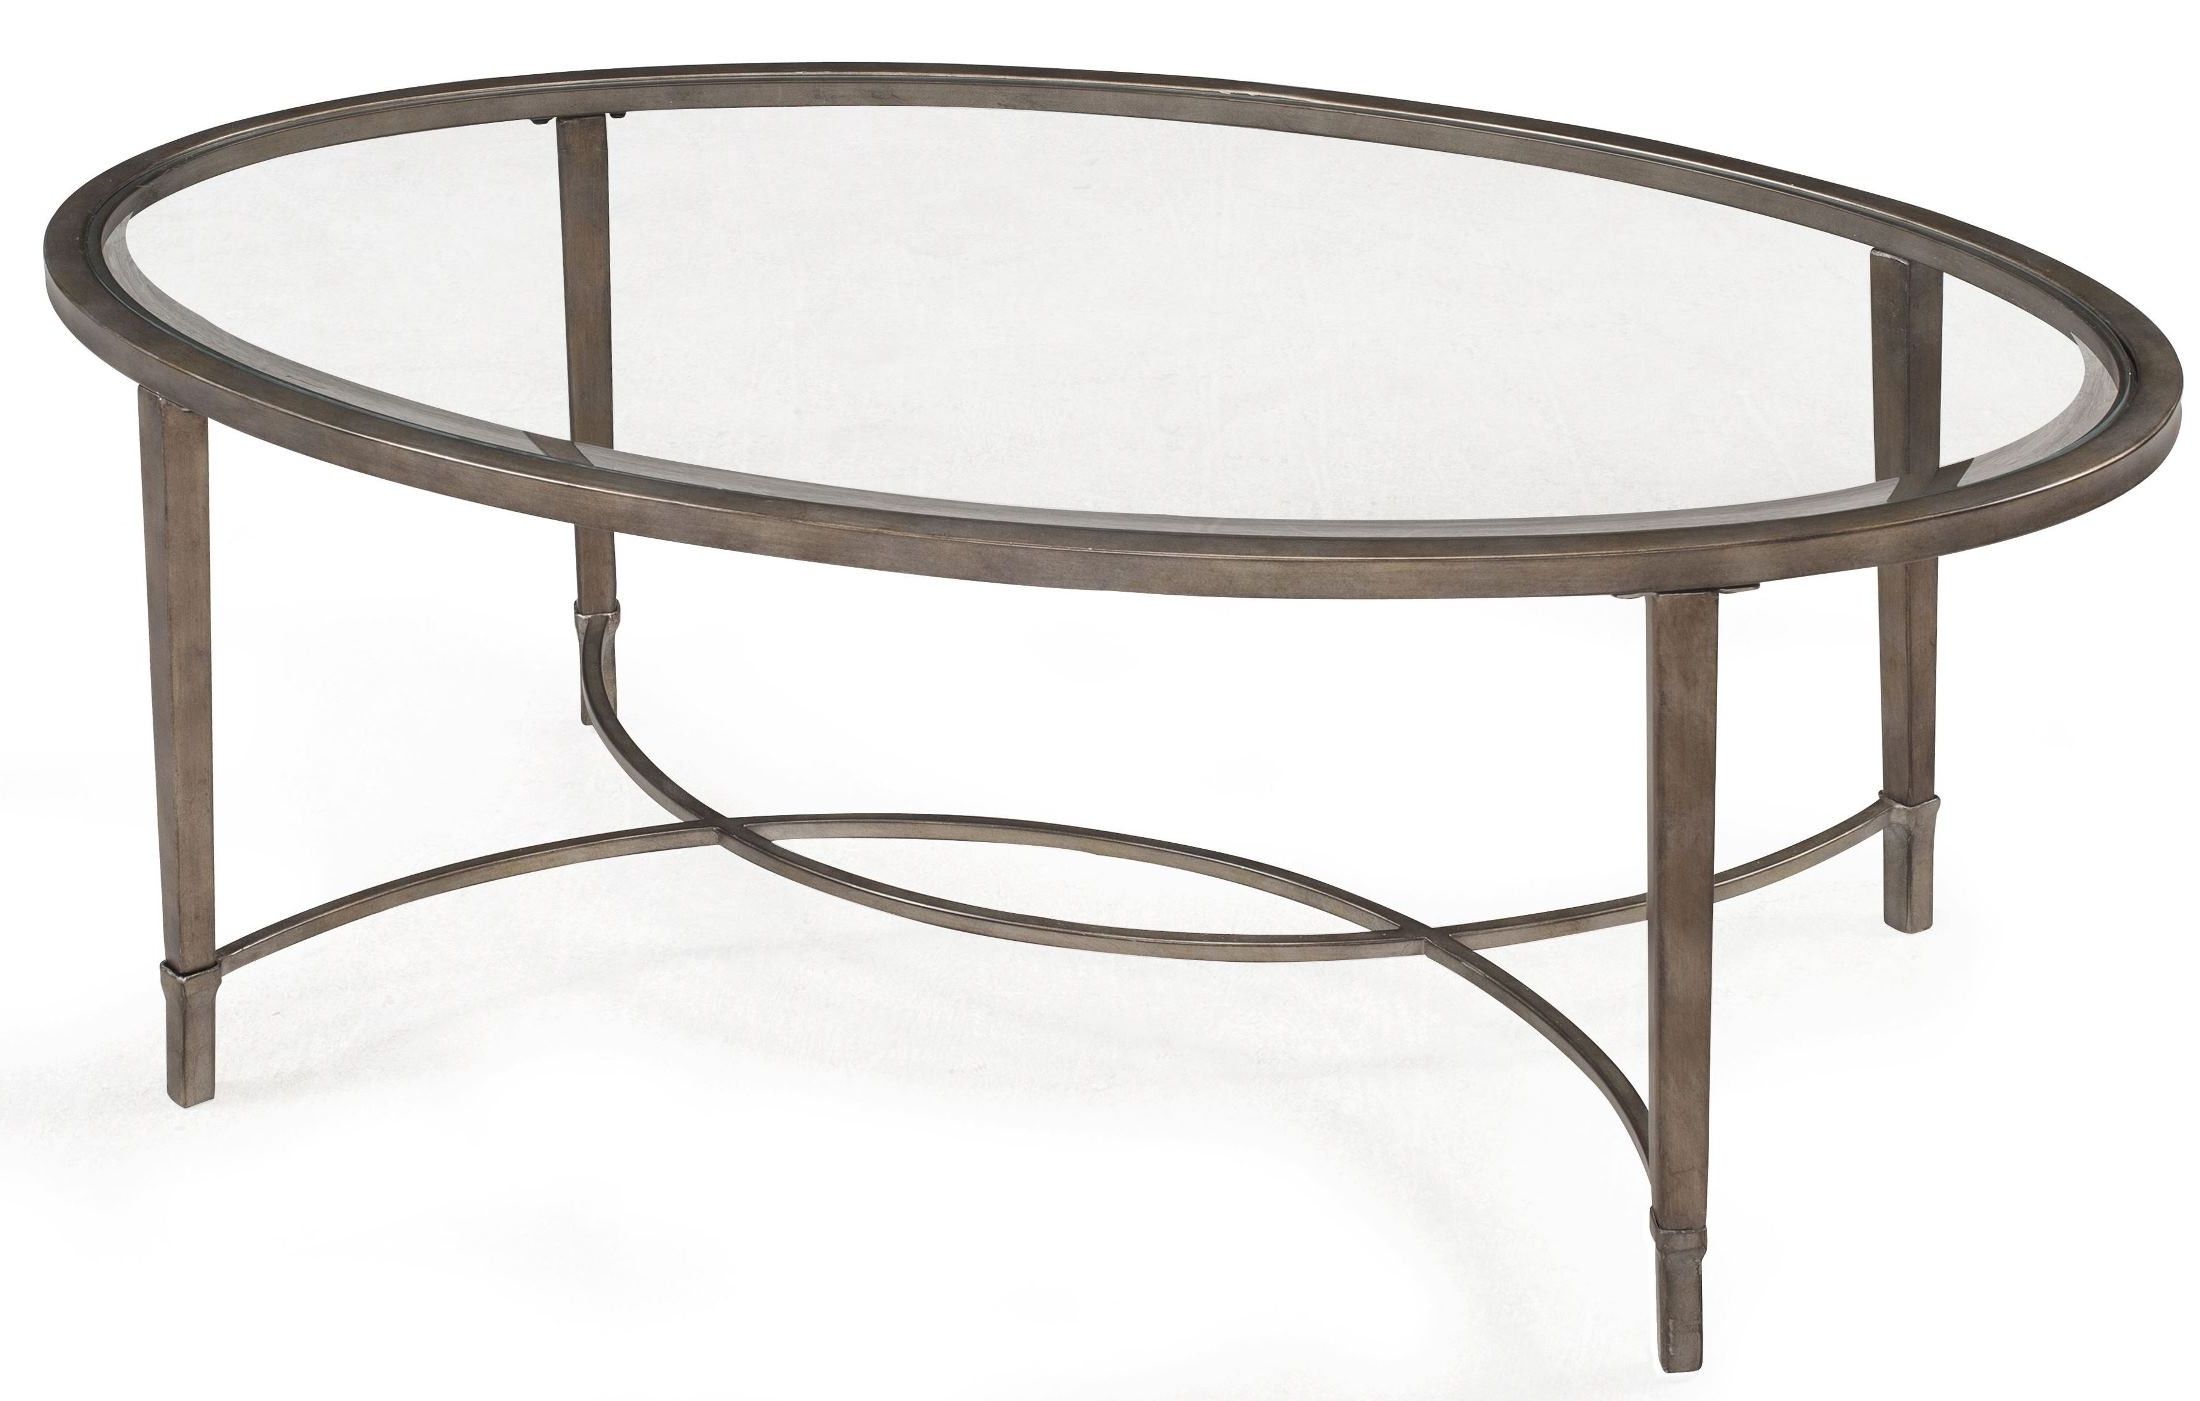 Copia Oval Cocktail Table From Magnussen Home (t2114 47 Inside Trendy Glass And Gold Oval Coffee Tables (View 4 of 20)